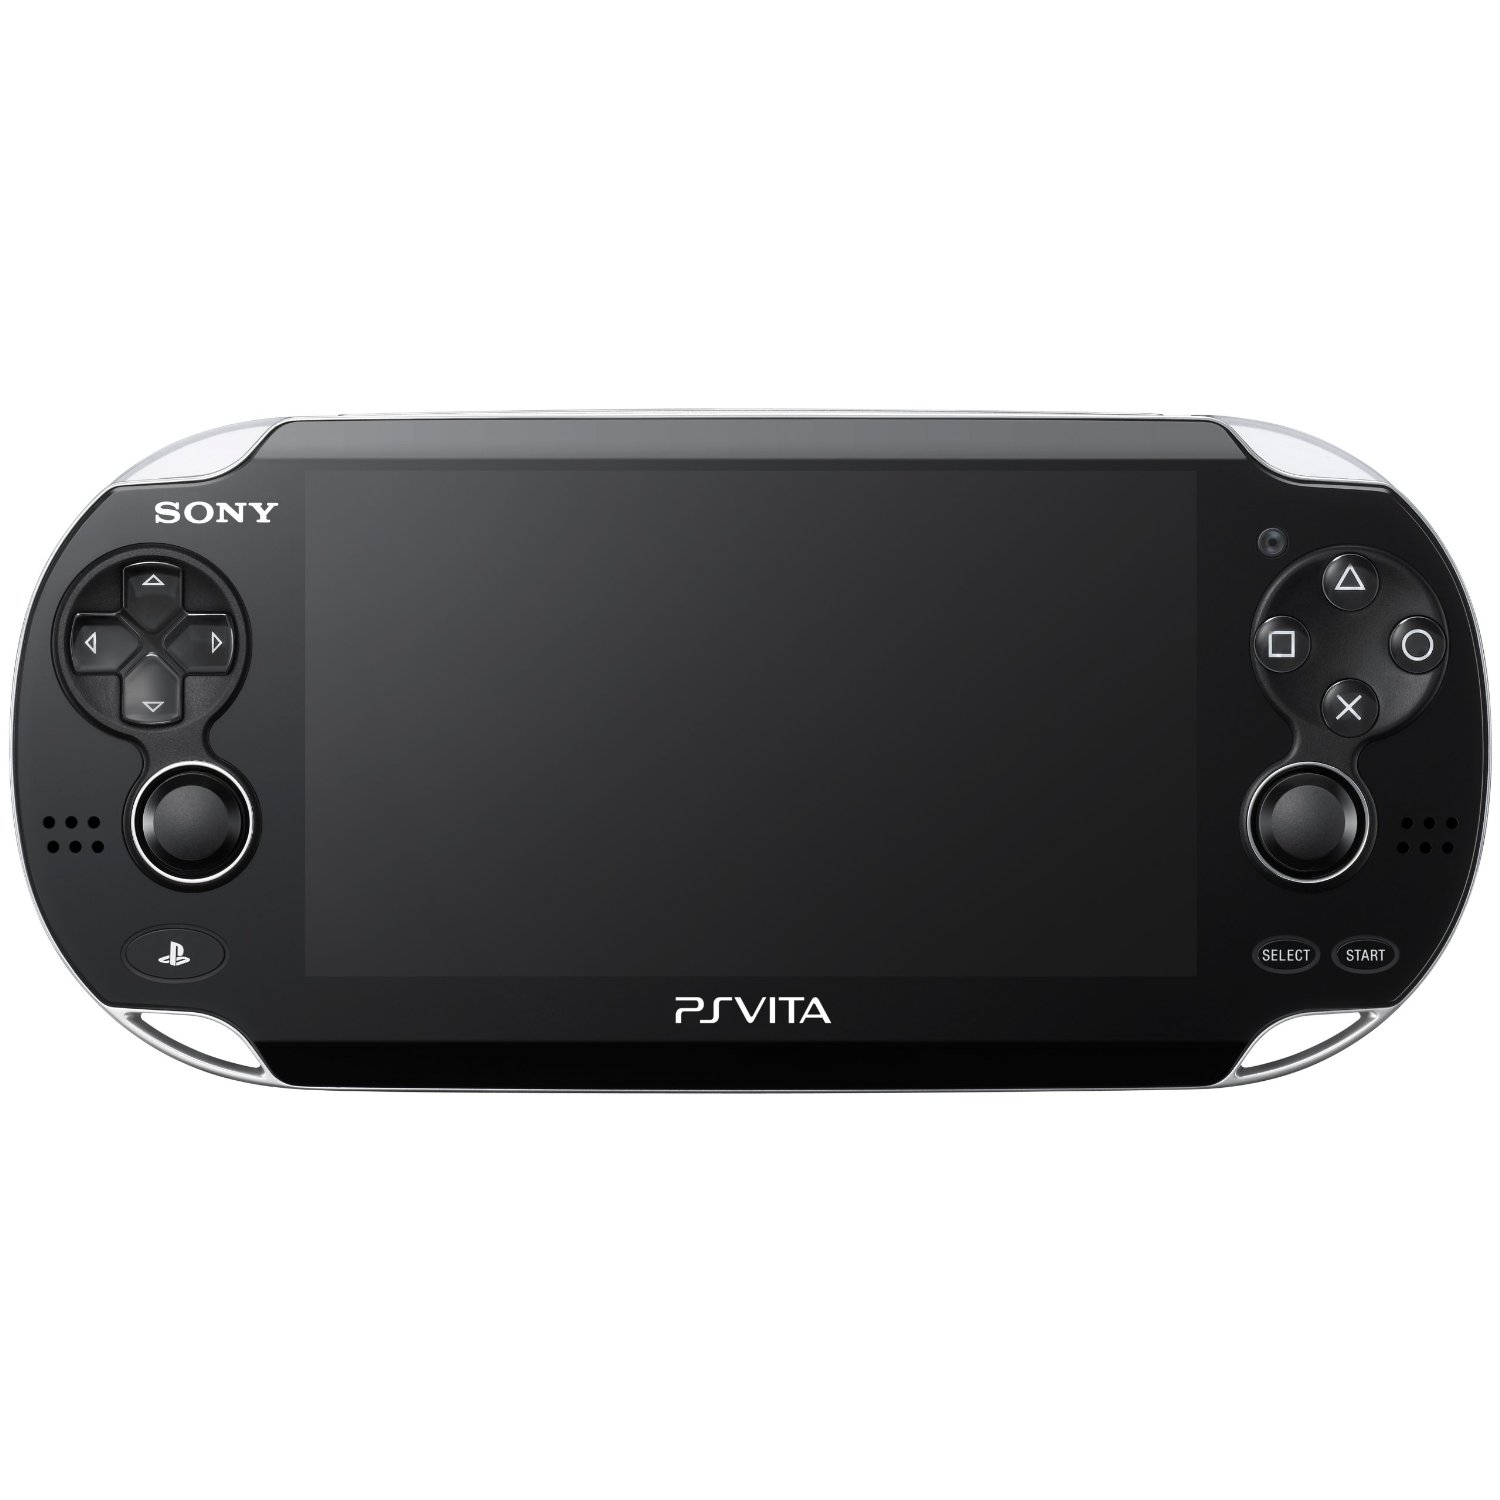 http://thetechjournal.com/wp-content/uploads/images/1108/1312713476-sonys-playstation-vita-hits-amazon-for-preorder--now-1.jpg